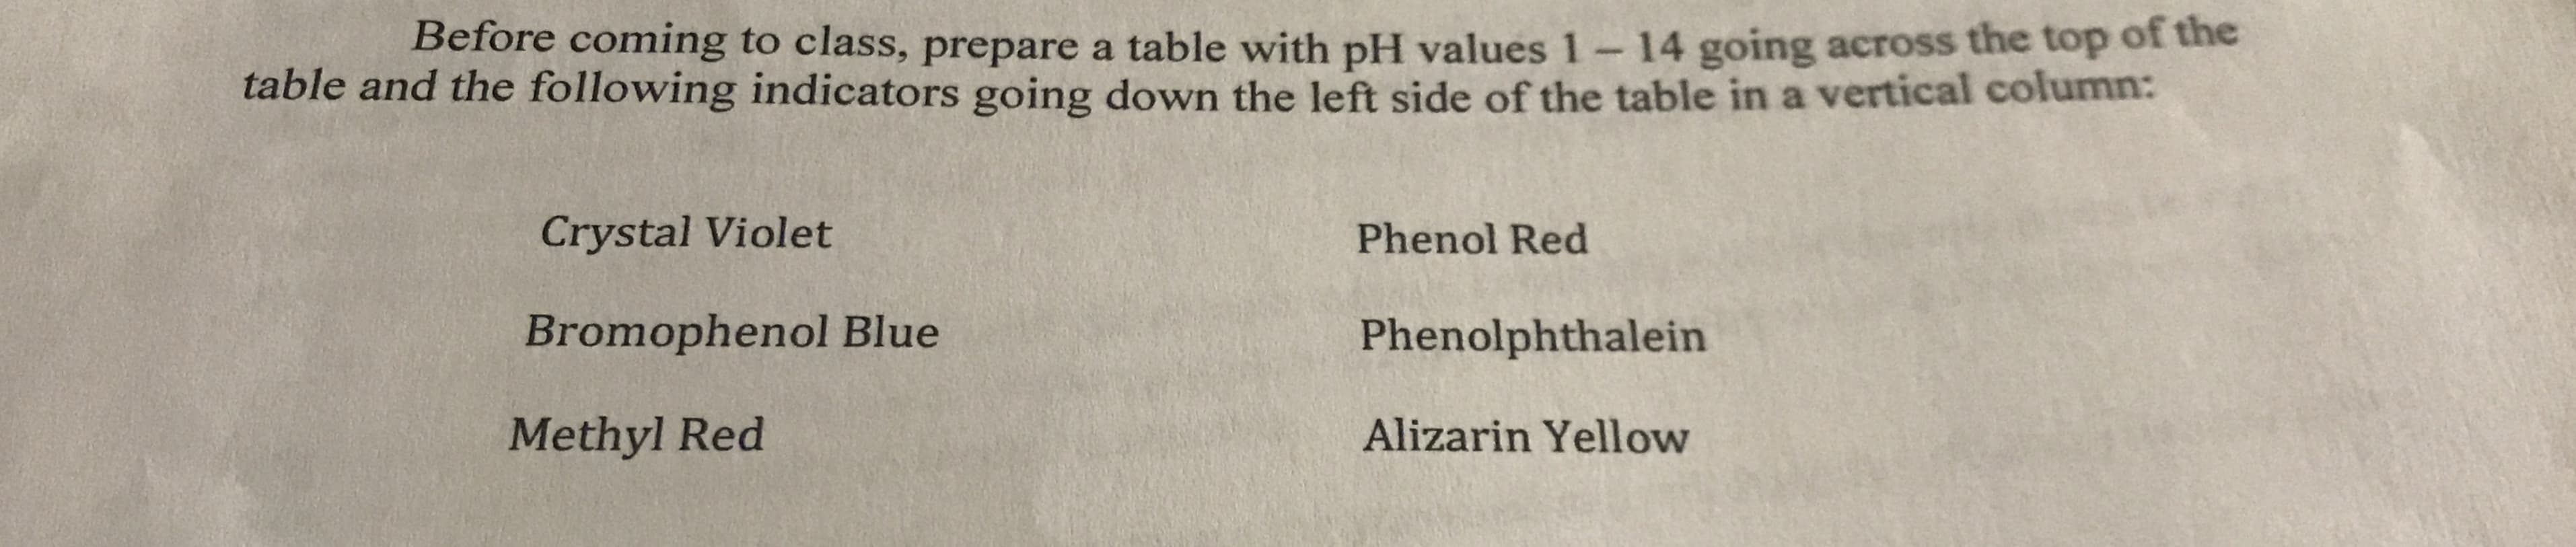 Before coming to class, prepare a table with pH values 1 -14 going across the top of the
table and the following indicators going down the left side of the table in a vertical column:
Crystal Violet
Phenol Red
Bromophenol Blue
Phenolphthalein
Alizarin Yellow
Methyl Red
